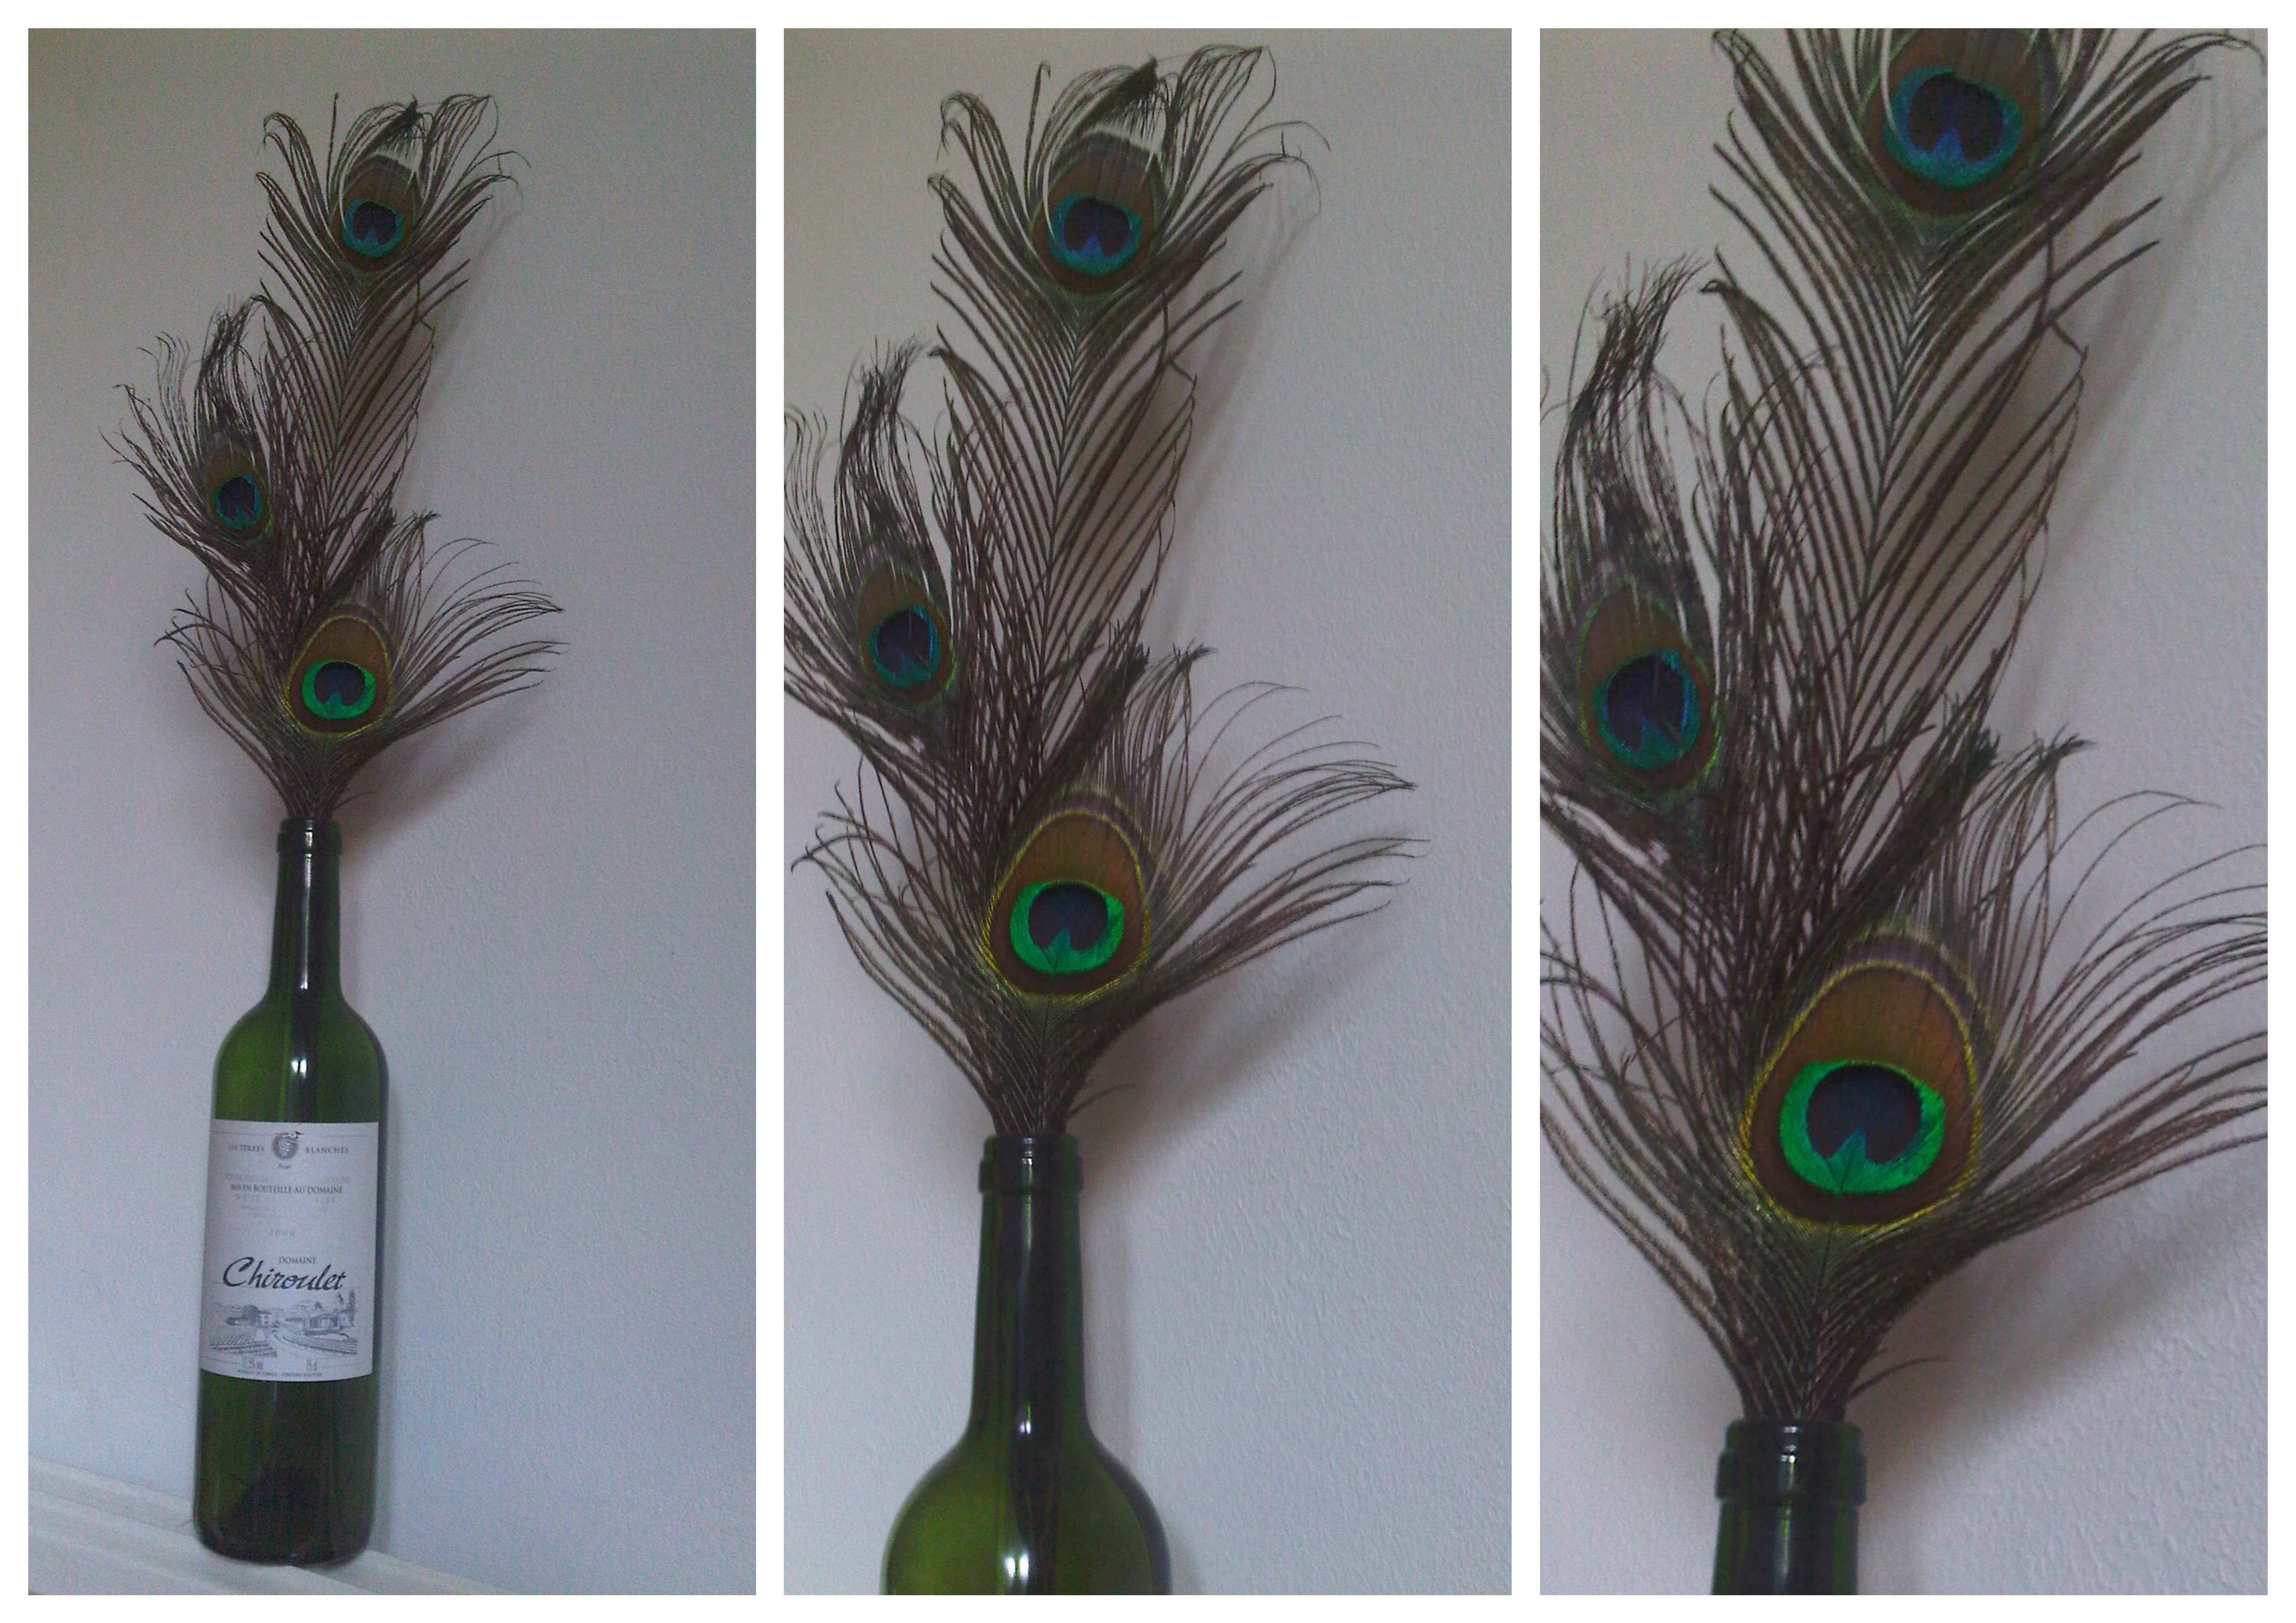 Peacock Feather Centerpieces and Vintage-Inspired ...